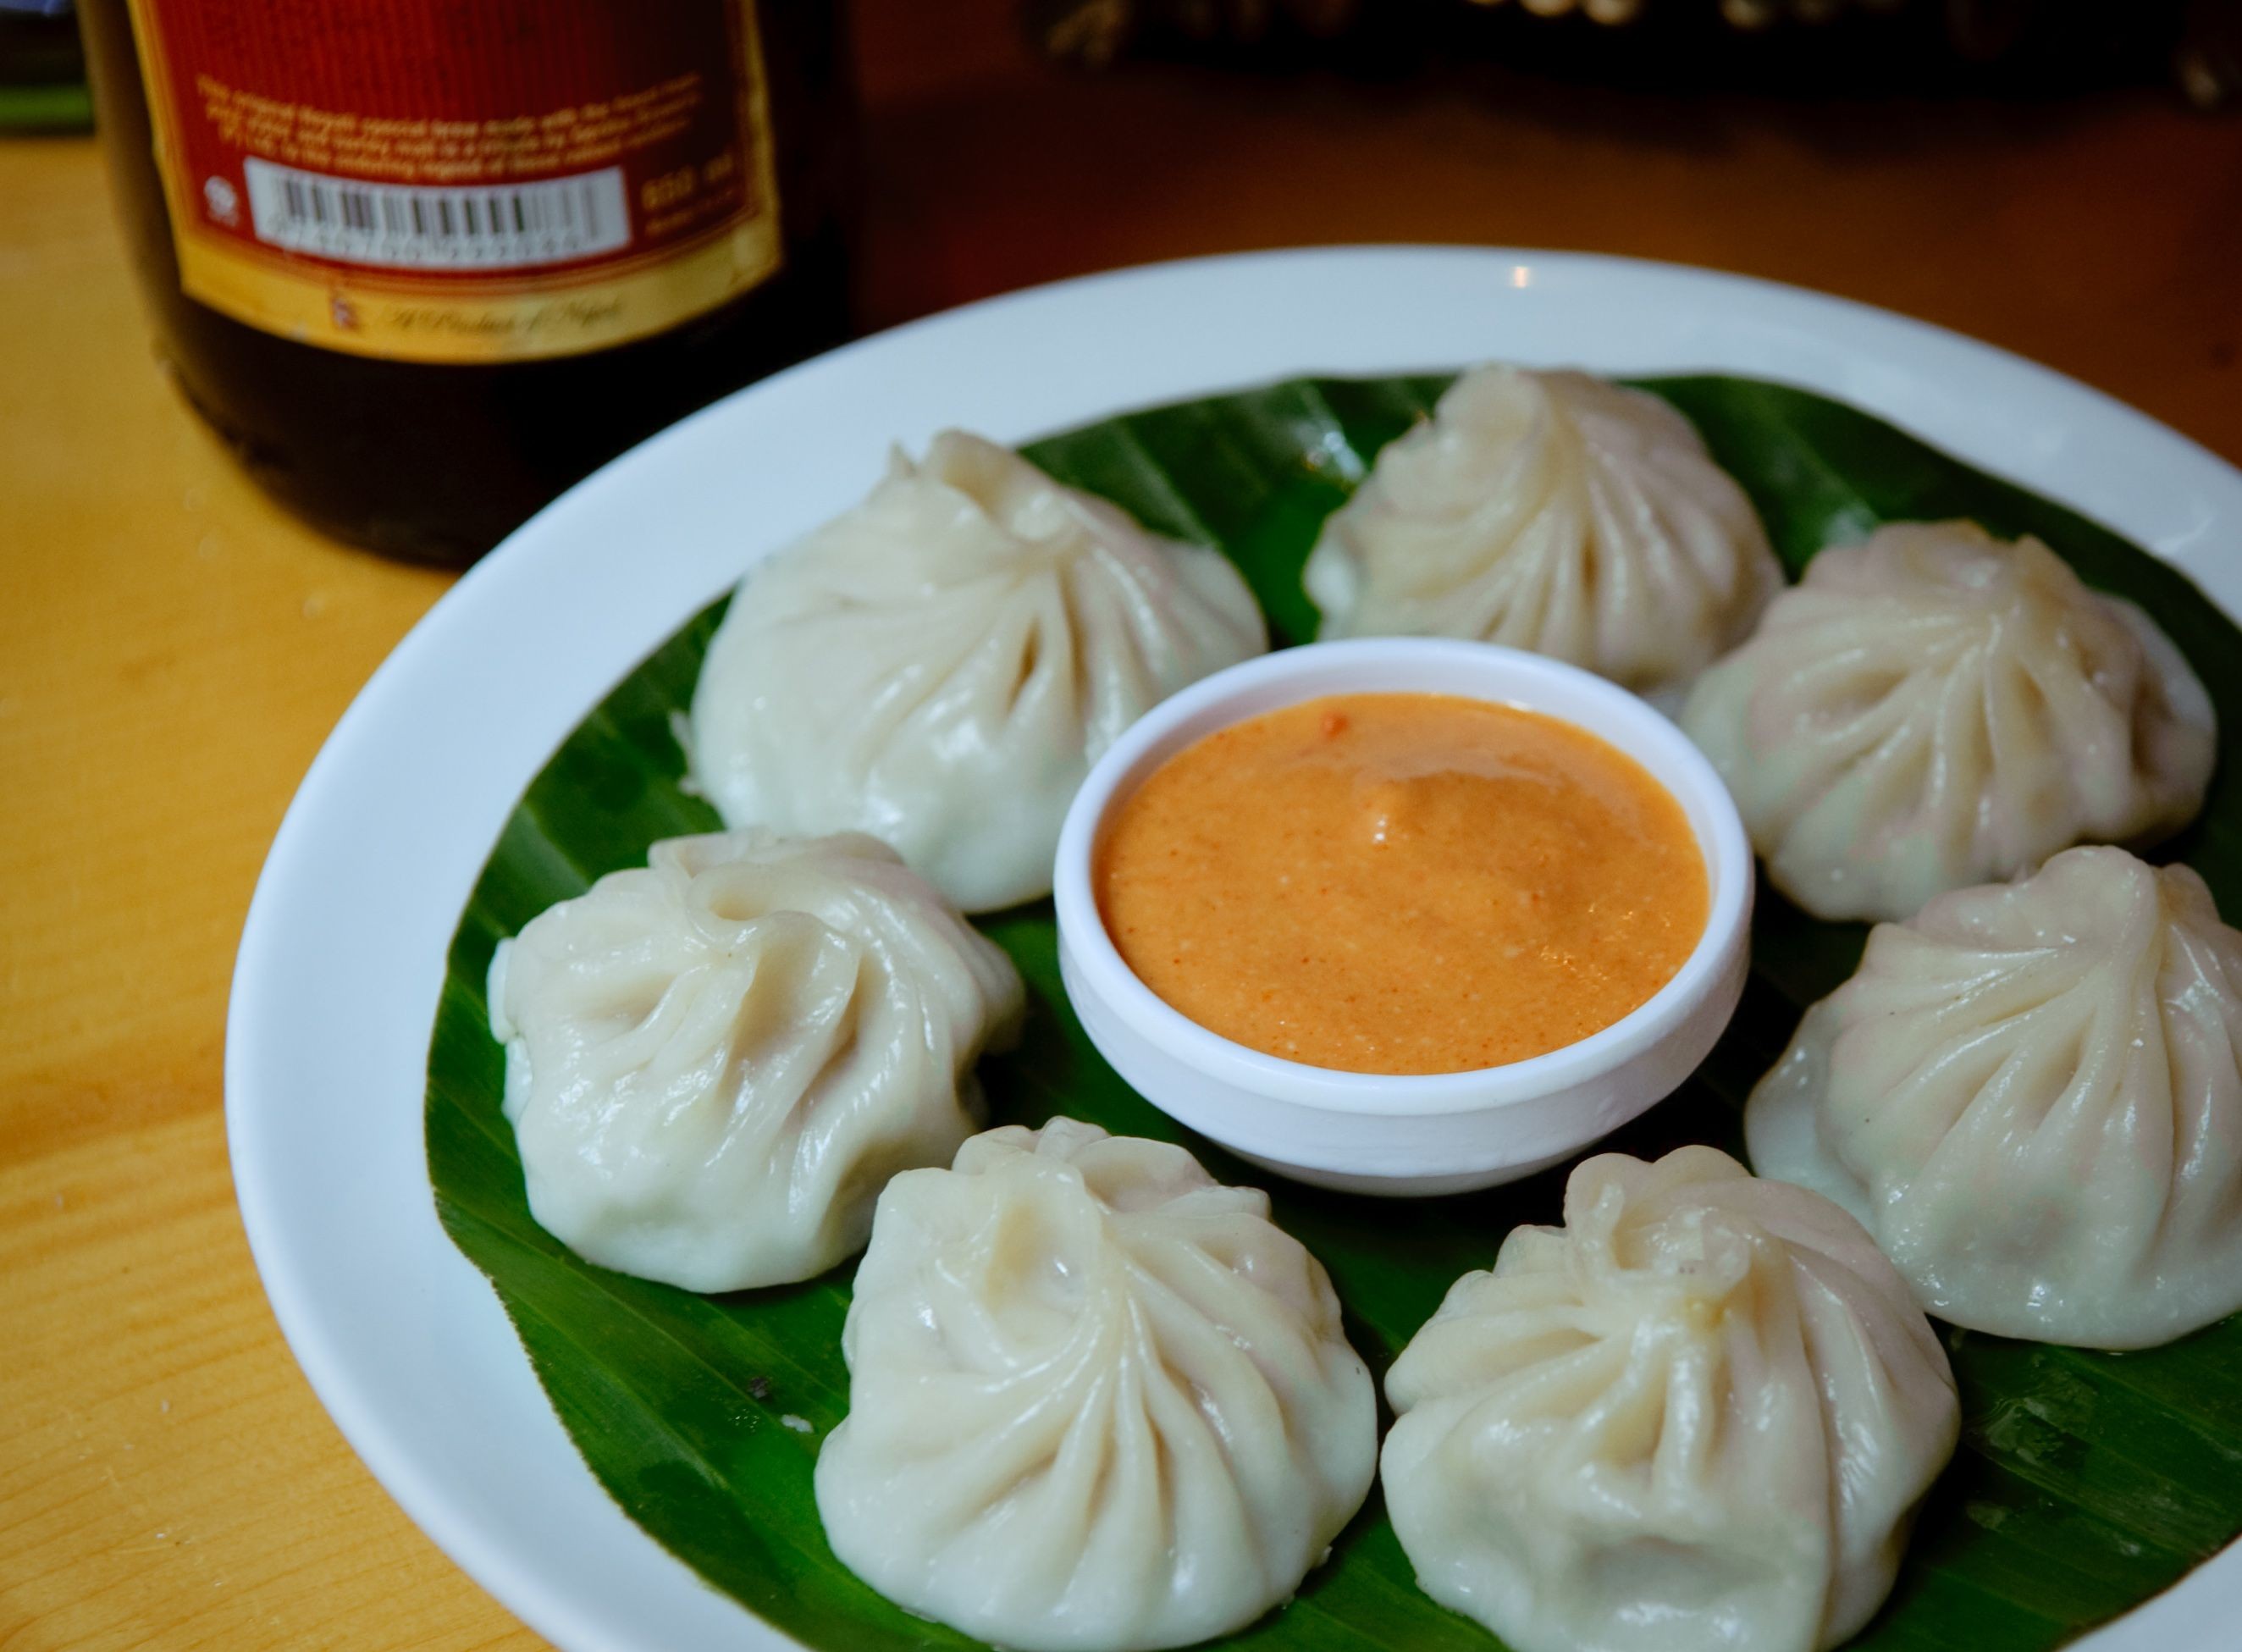 Momos, a dim sum-like dish that began to take hold in India in the 1950s, is the subject of protests in troubled Indian border states such as Jammu and Kashmir. Handout photo